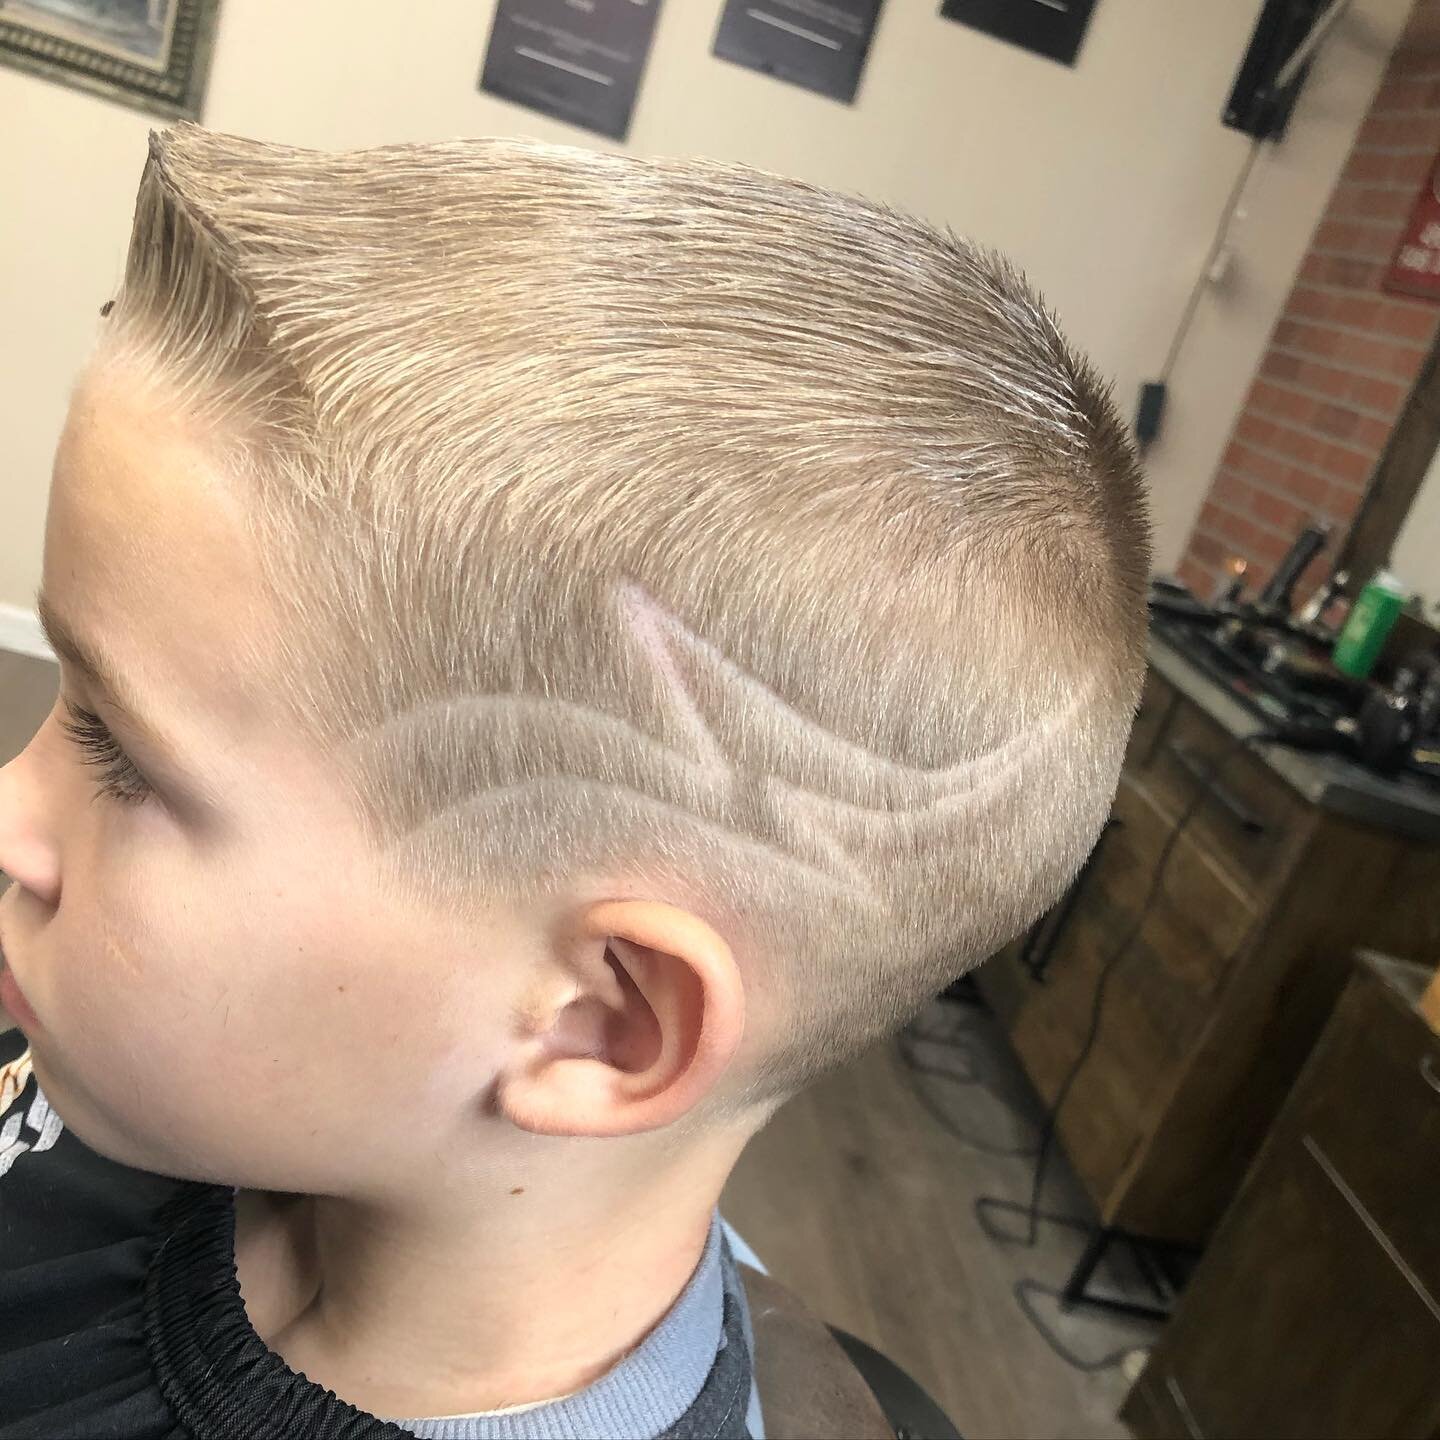 Tag team hair cut! Lightning bolt design by Phil. Fade by Elijah. Book your holiday cut with us today!!